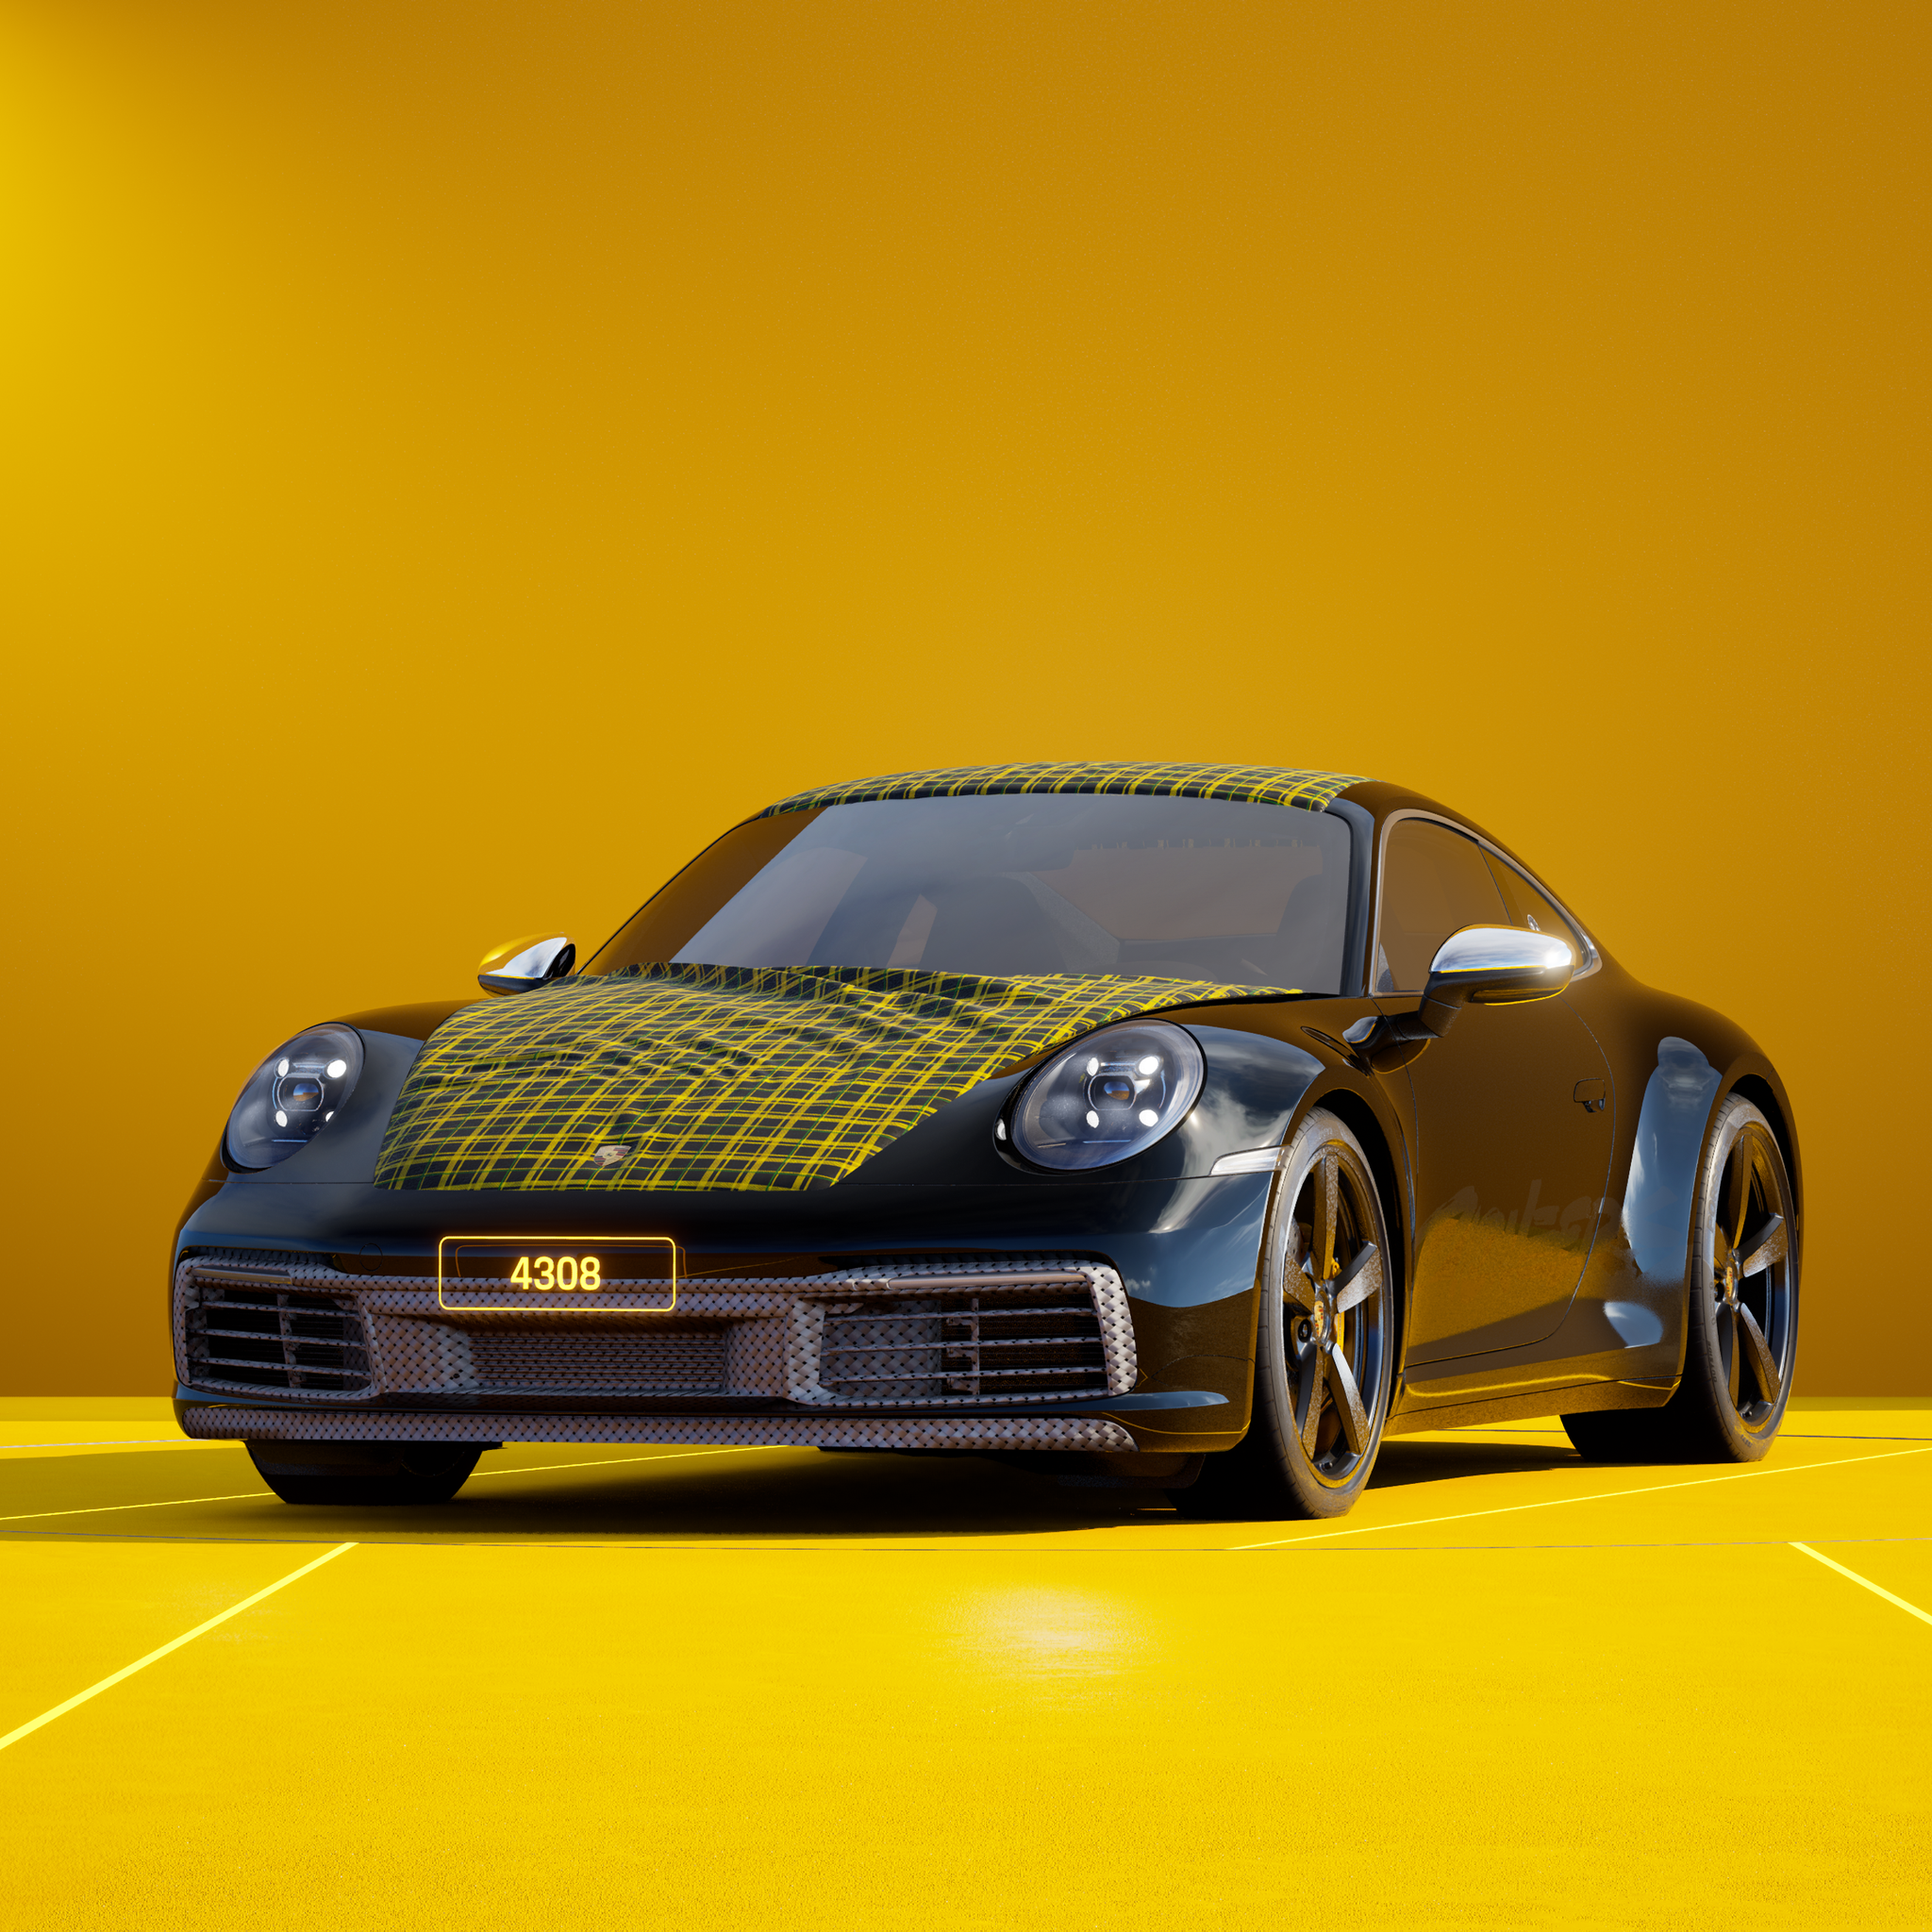 The PORSCHΞ 911 4308 image in phase